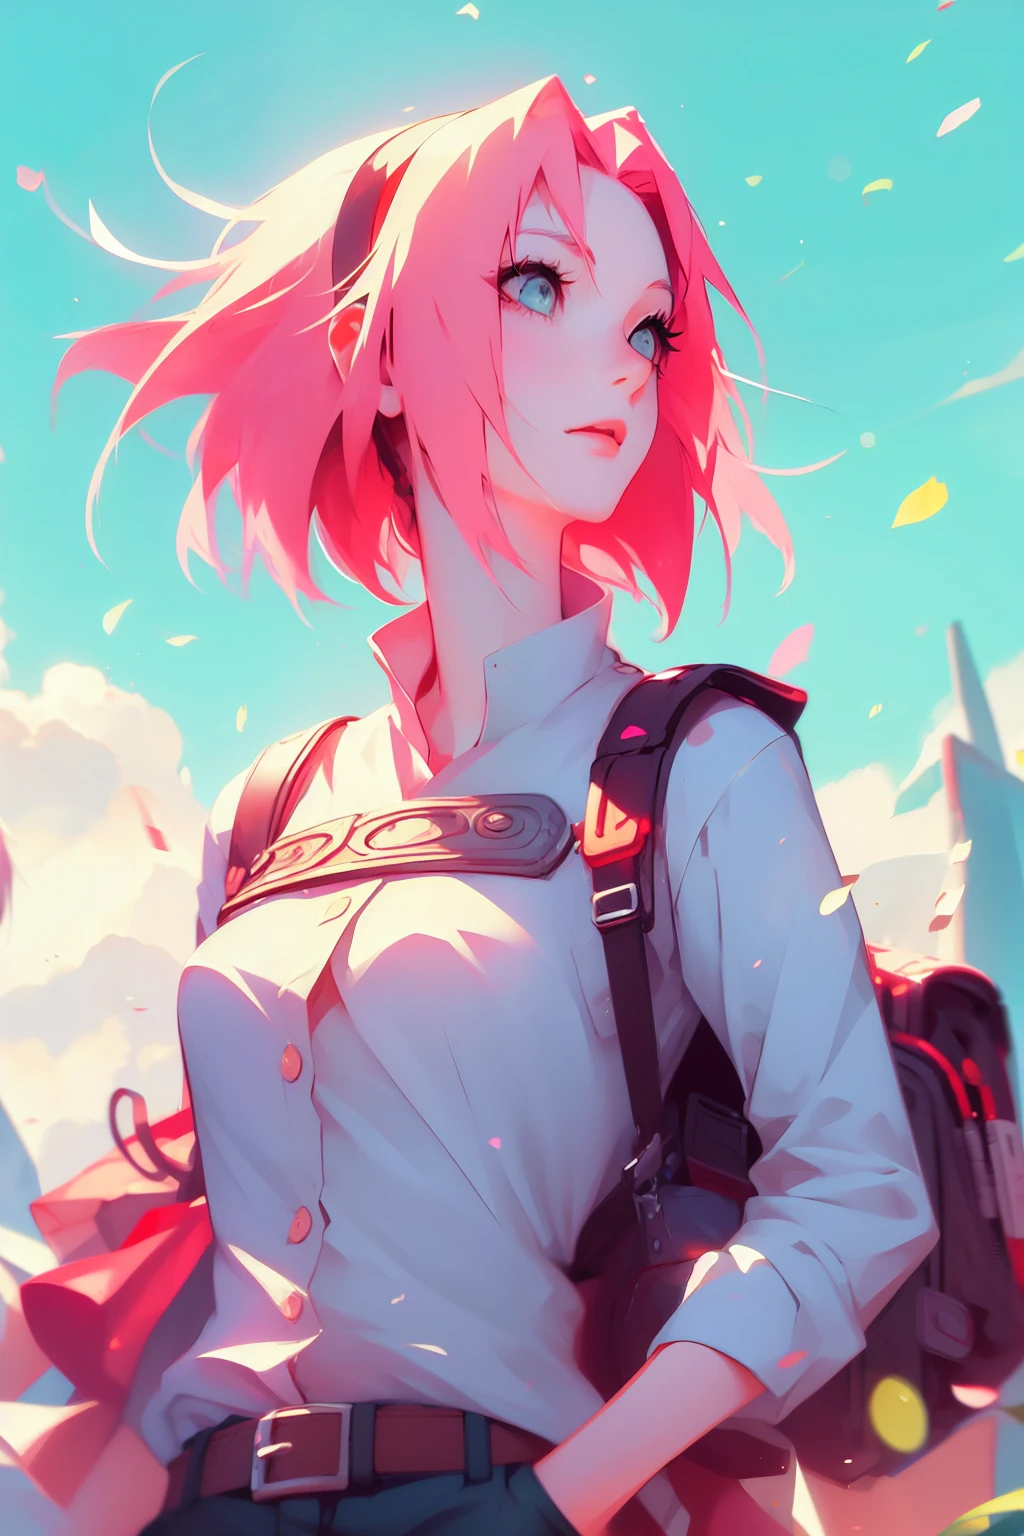 sasusaku. Sasuke Uchiha, tall man with black hair, wearing a white blouse and jeans, , hands in his pockets. Sakura, a thin woman with pink hair, she is after Sasuke, she is a rebel. best quality, adorable, ultra-detailed, illustration, complex, detailed, extremely detailed, detailed face, soft light, soft focus, perfect face, beautiful and accurate anatomy.